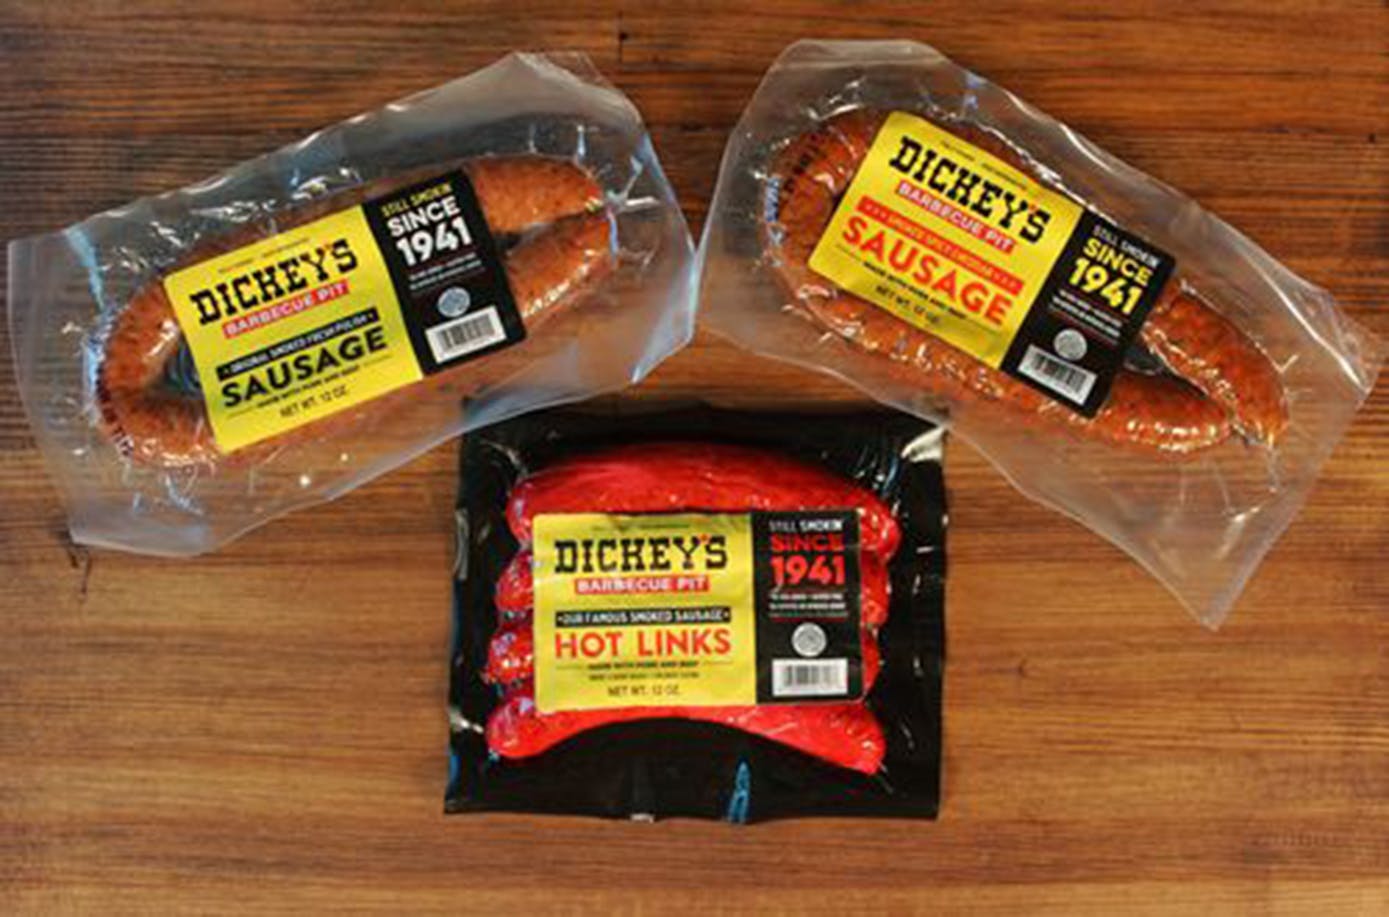 Fast Casual: Dickey's Sells Sausage in Kroger